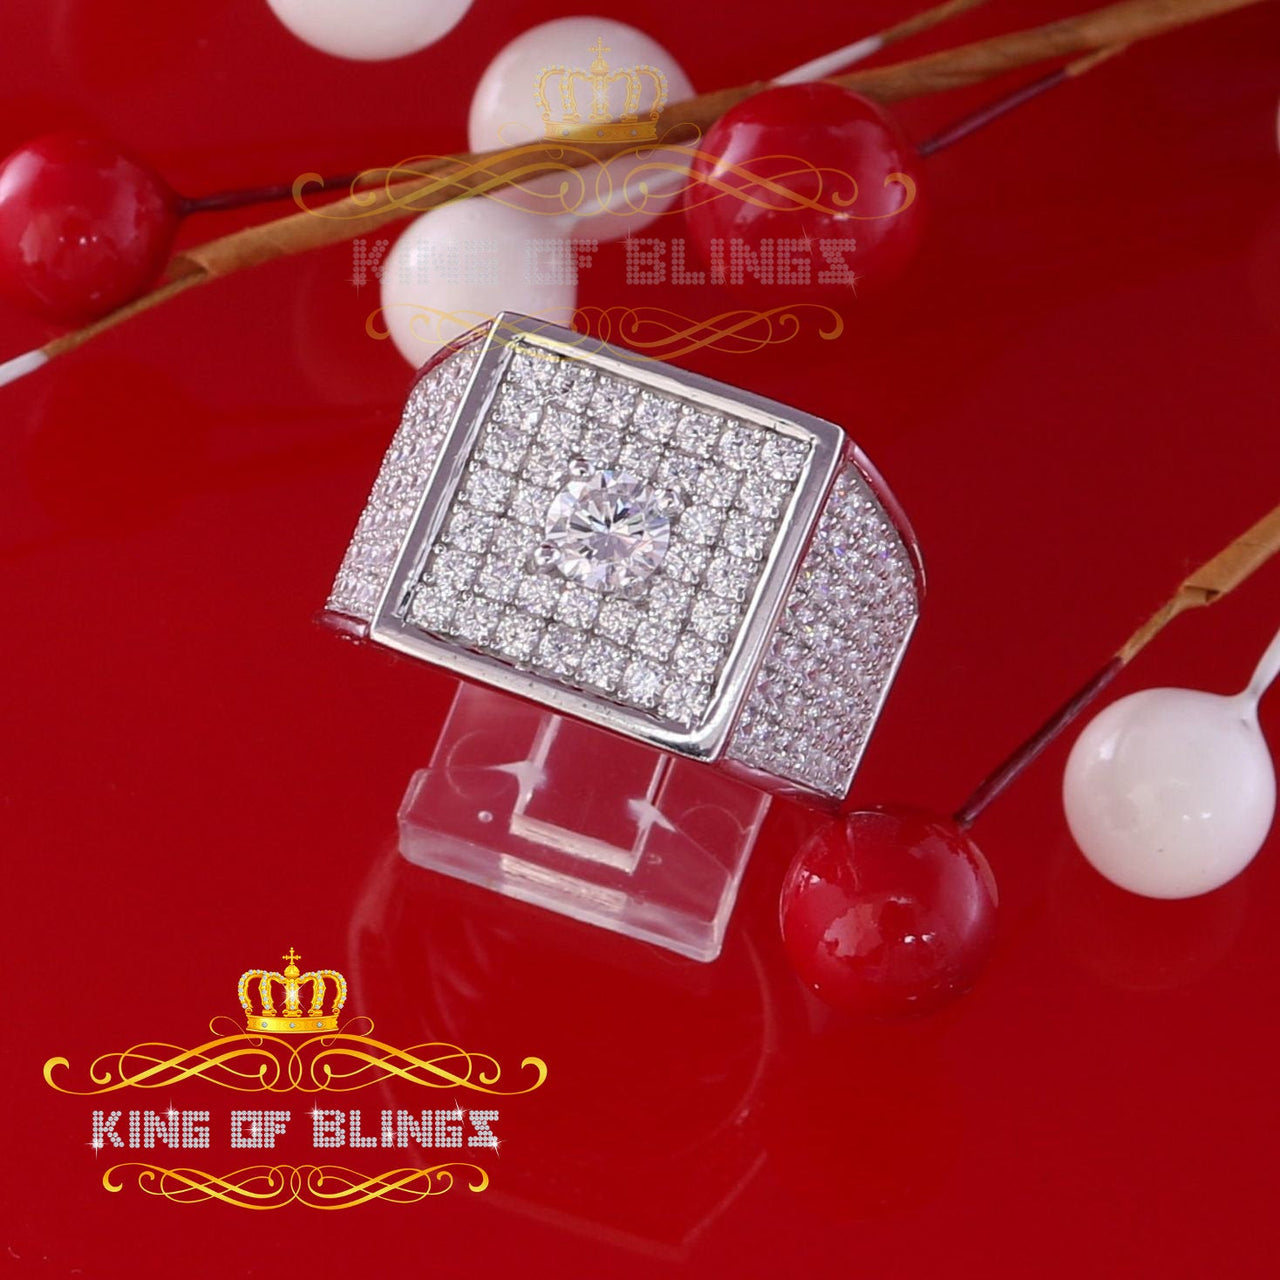 9.50ct Cubic Zirconia White Silver Square Men's Adjustable Ring From SZ 9 to 11 KING OF BLINGS